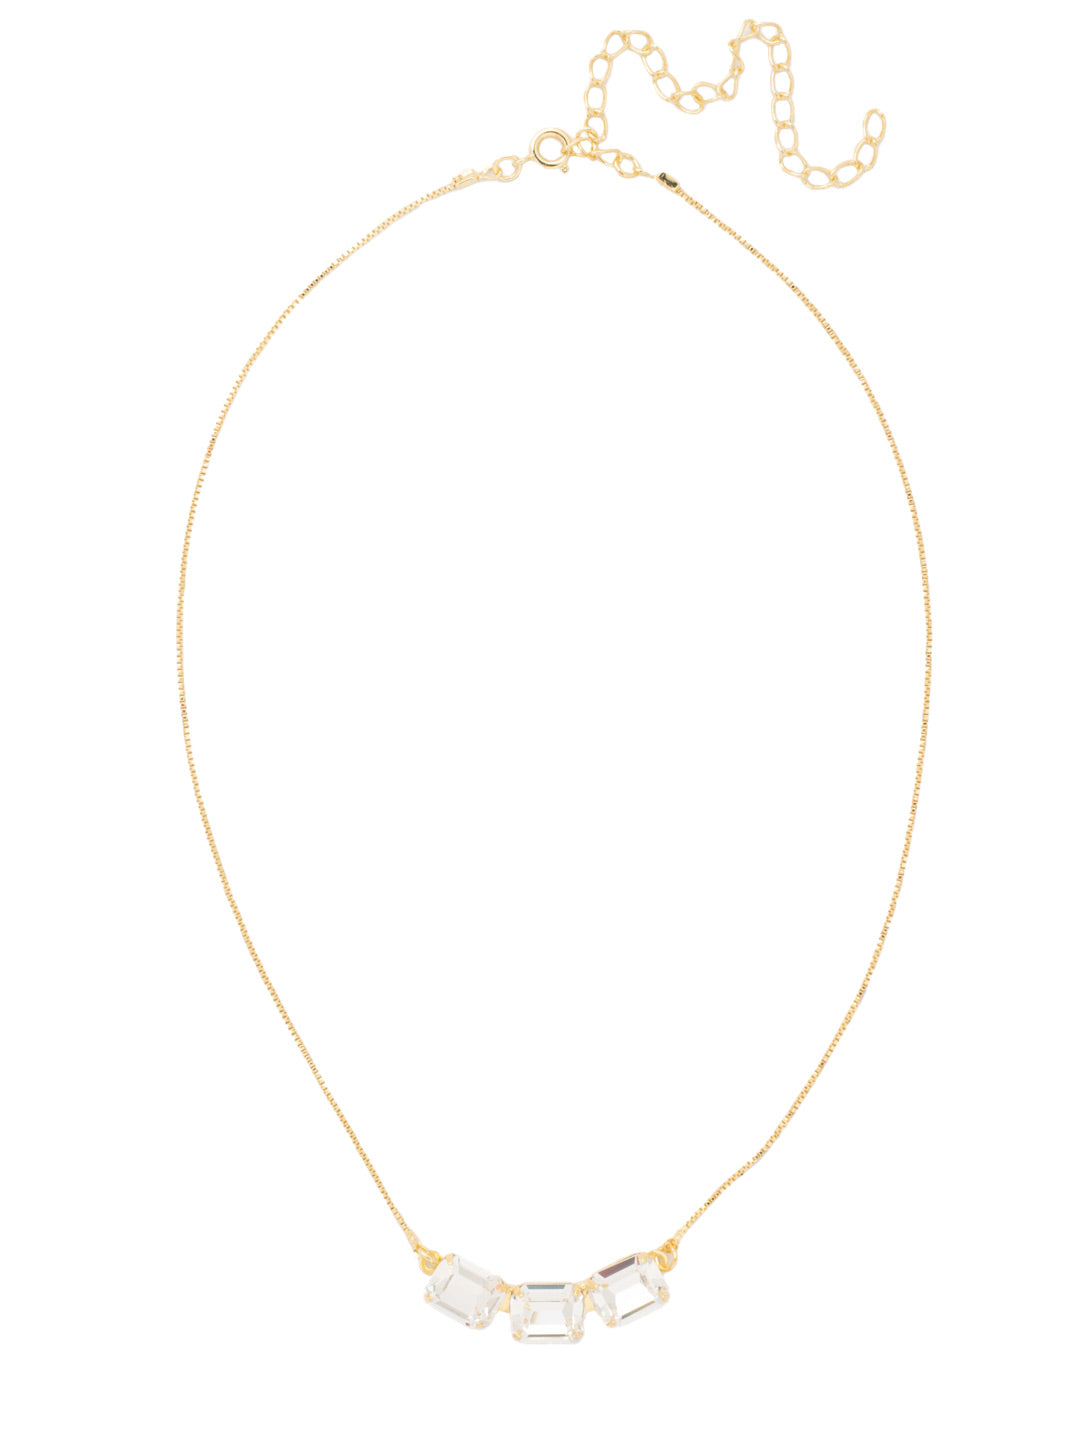 Octavia Triple Tennis Necklace - NFL15BGCRY - <p>The Octavia Triple Tennis Necklace features three emerald cut crystals on a dainty adjustable chain, secured by a spring ring clasp. From Sorrelli's Crystal collection in our Bright Gold-tone finish.</p>